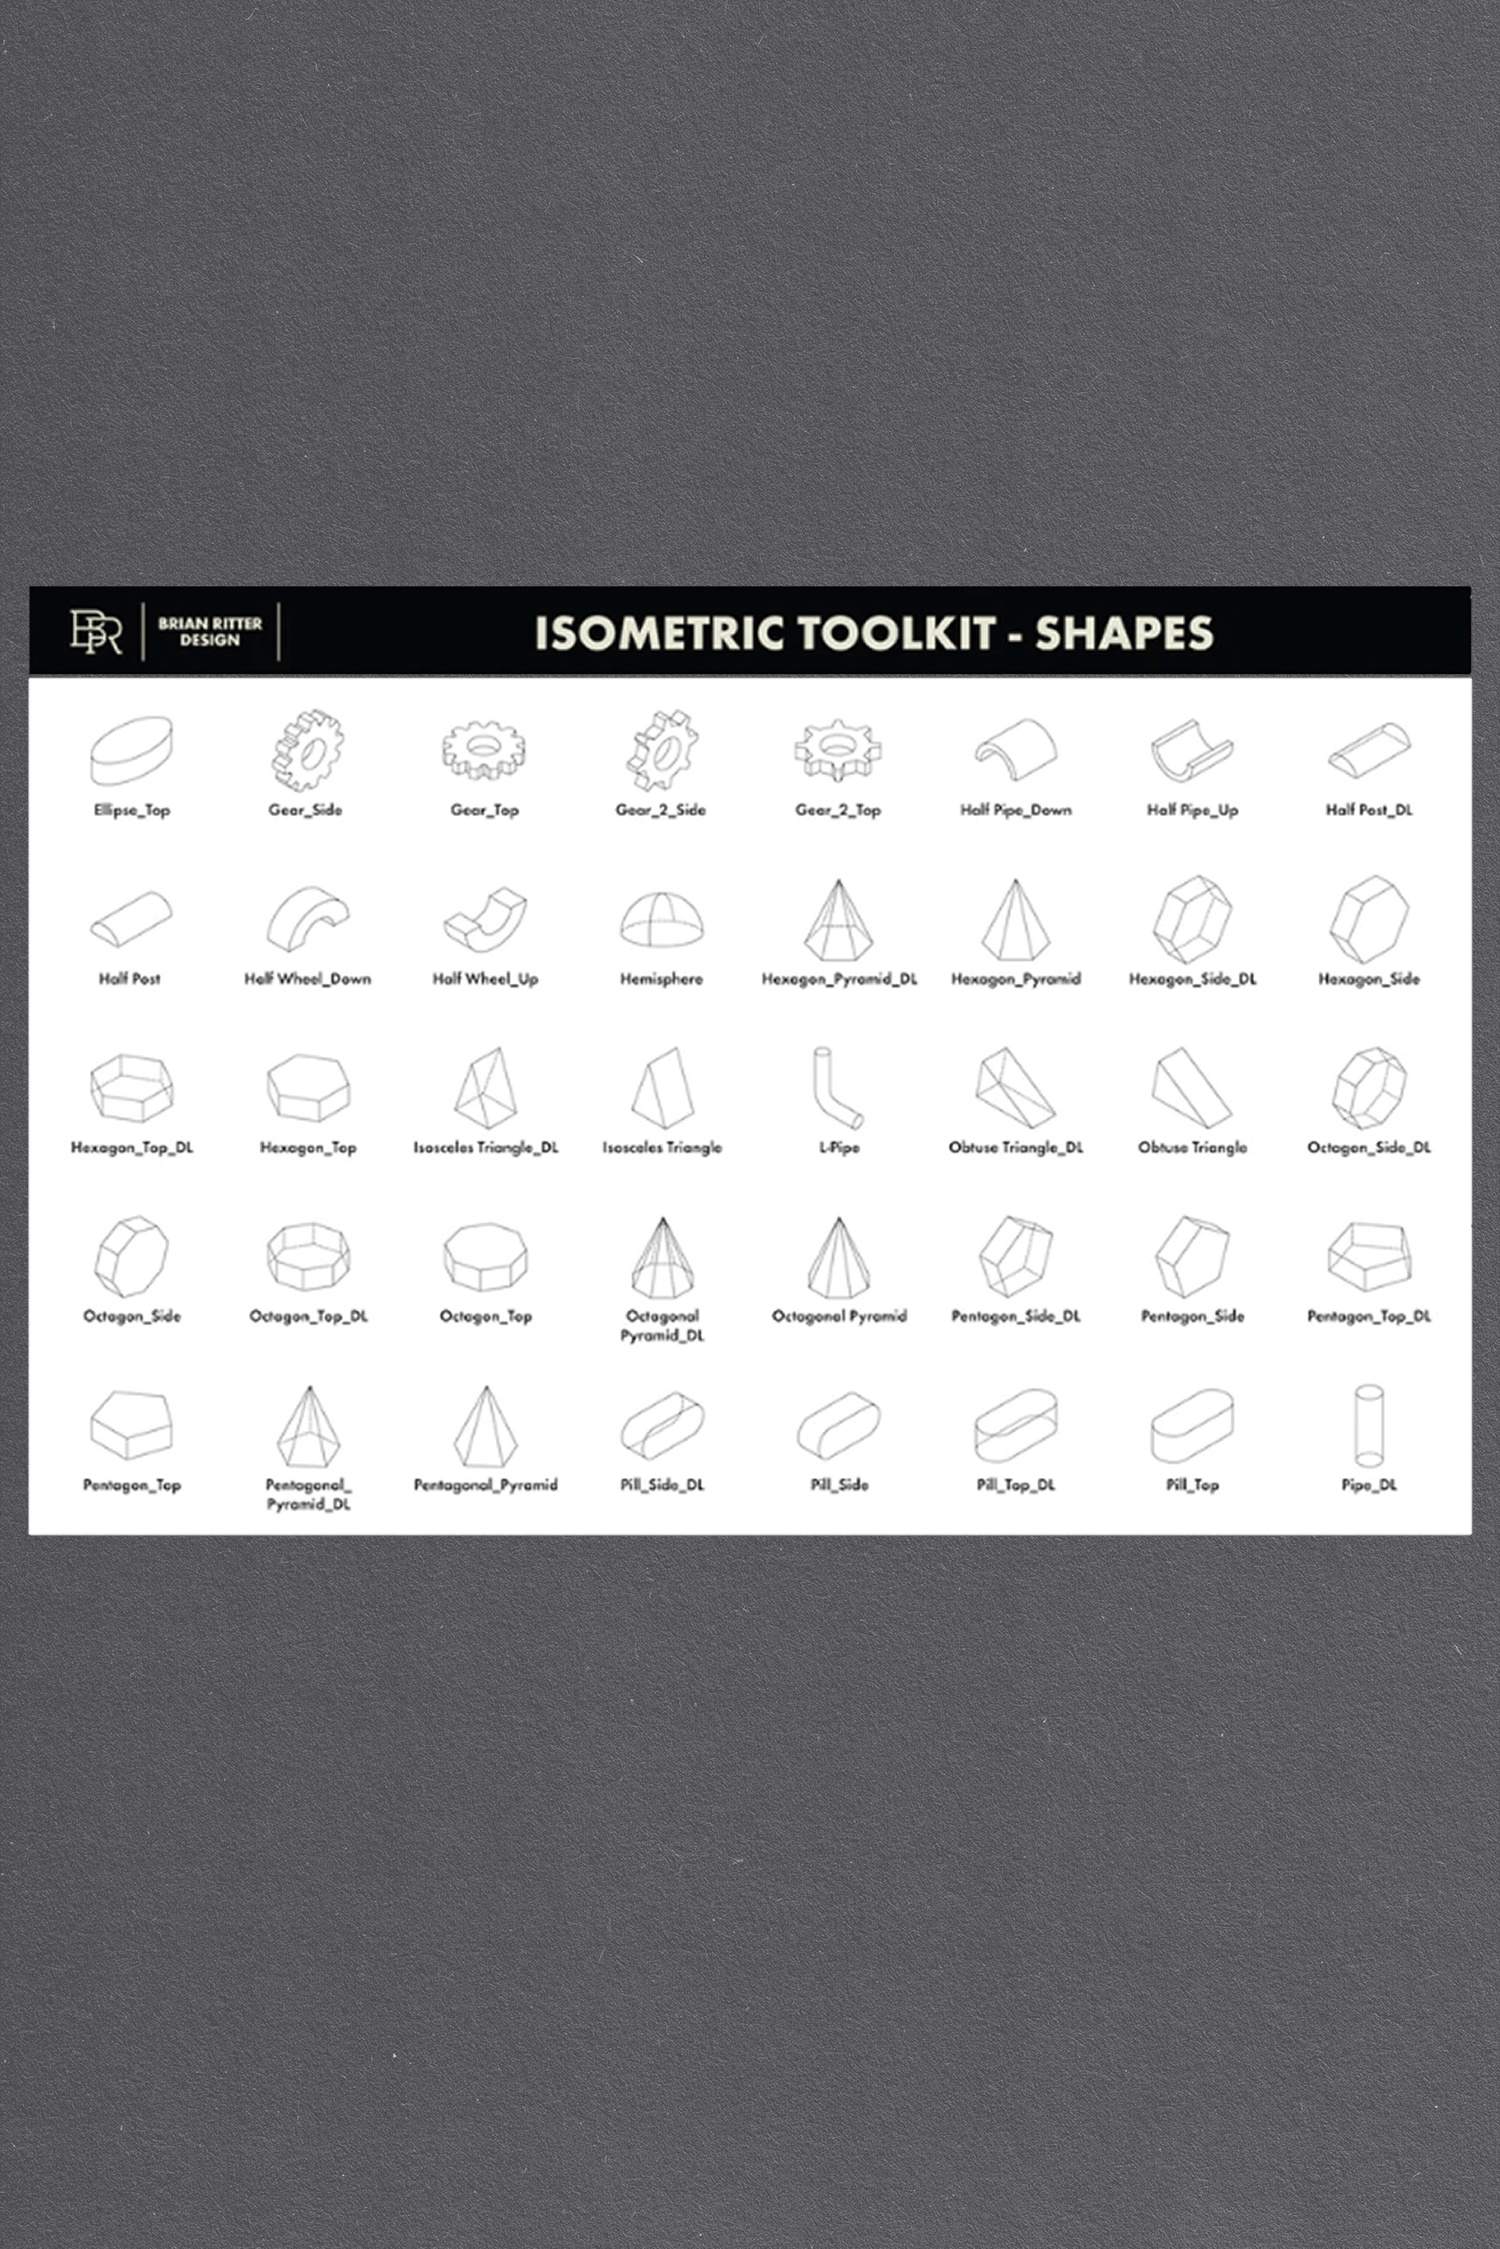 Isometric Toolkit by Brian Ritter Design